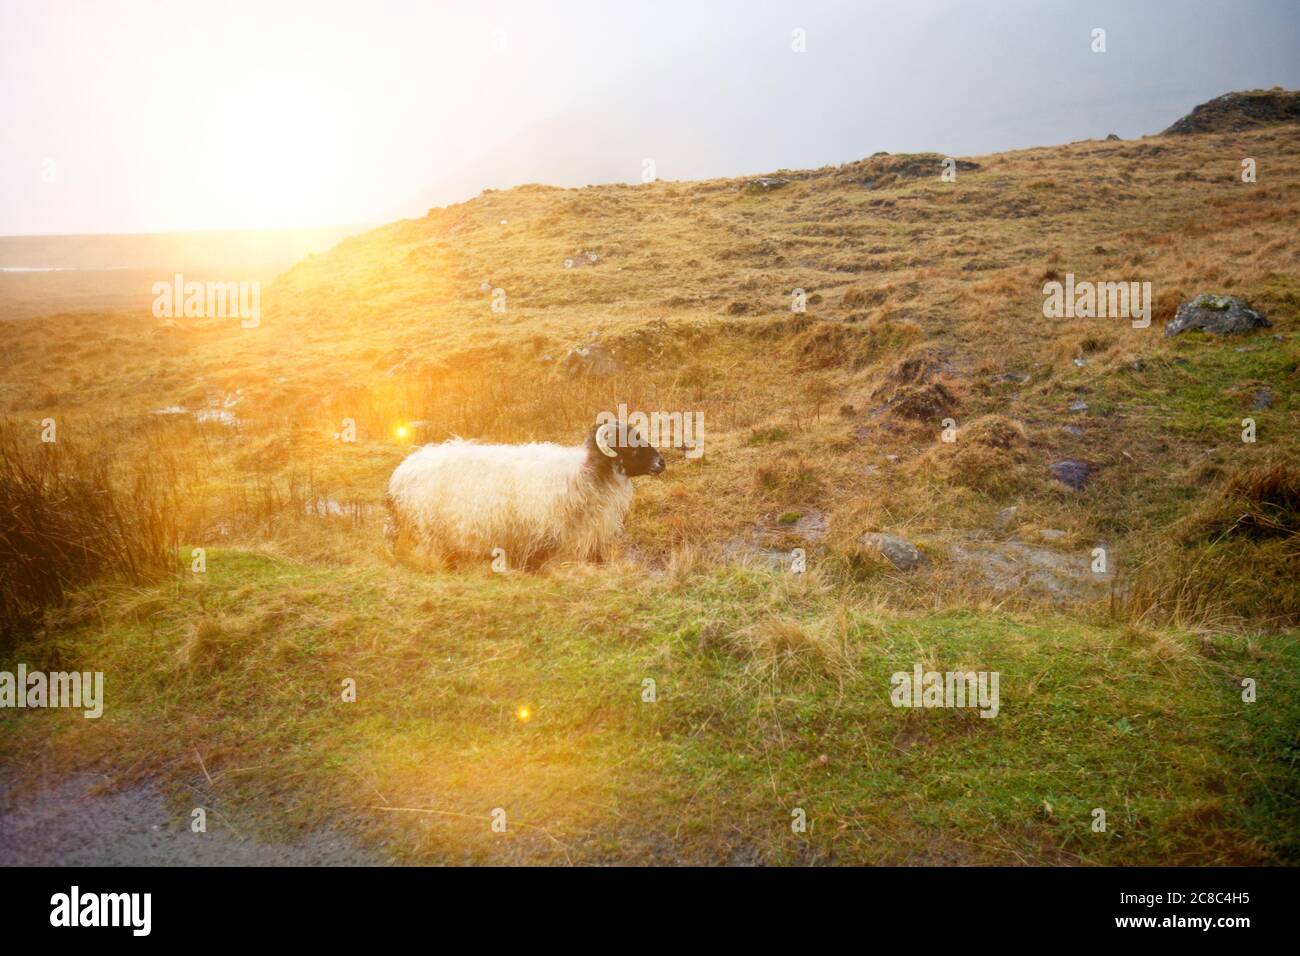 Sheep in field with strong sunshine Stock Photo